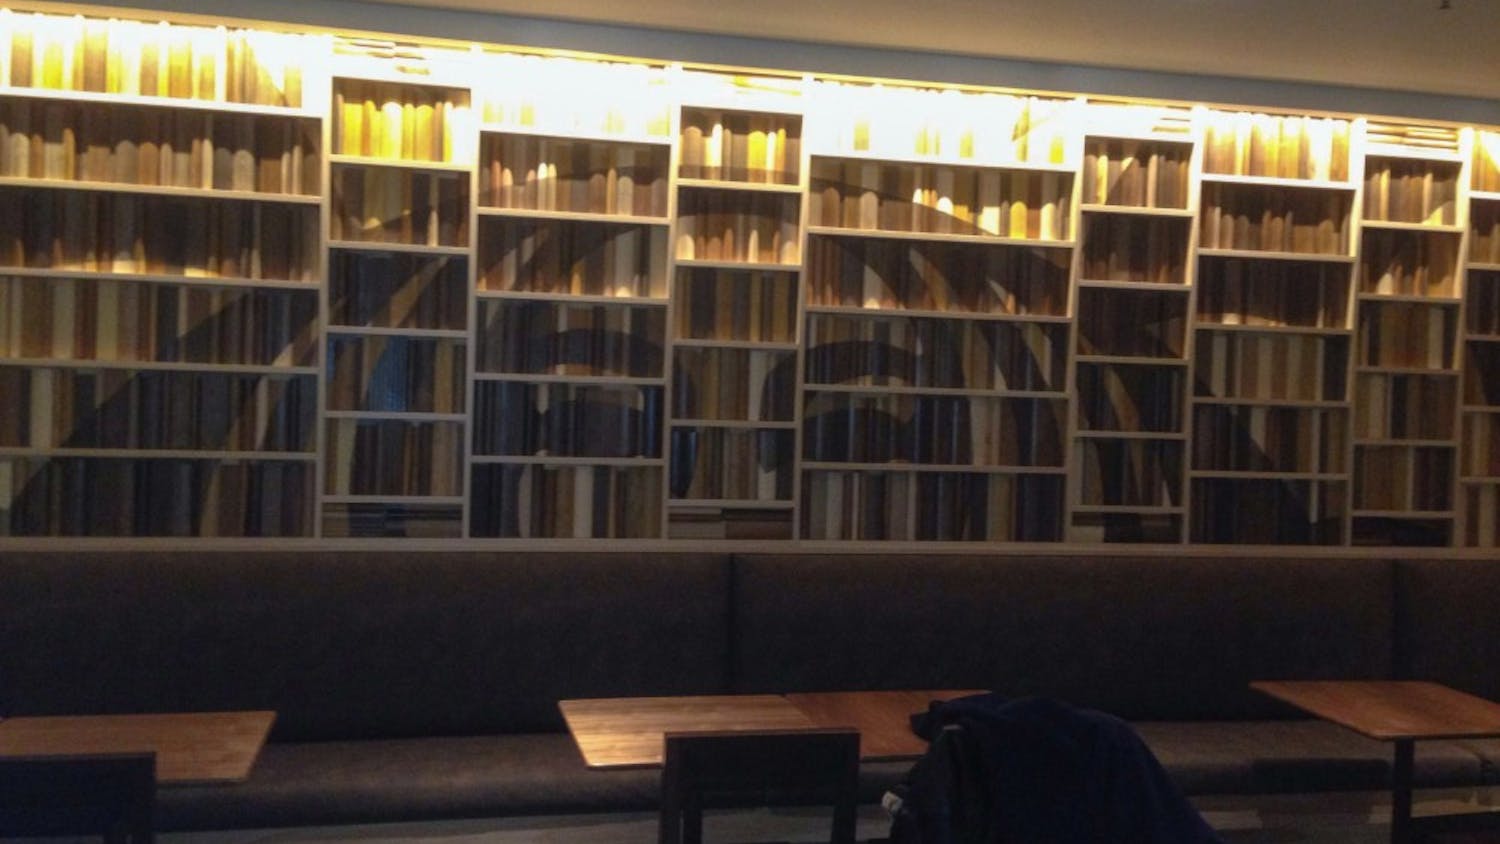 	A 3-D wall mural of decorative books line the back wall of the Starbucks where students can sit and study.